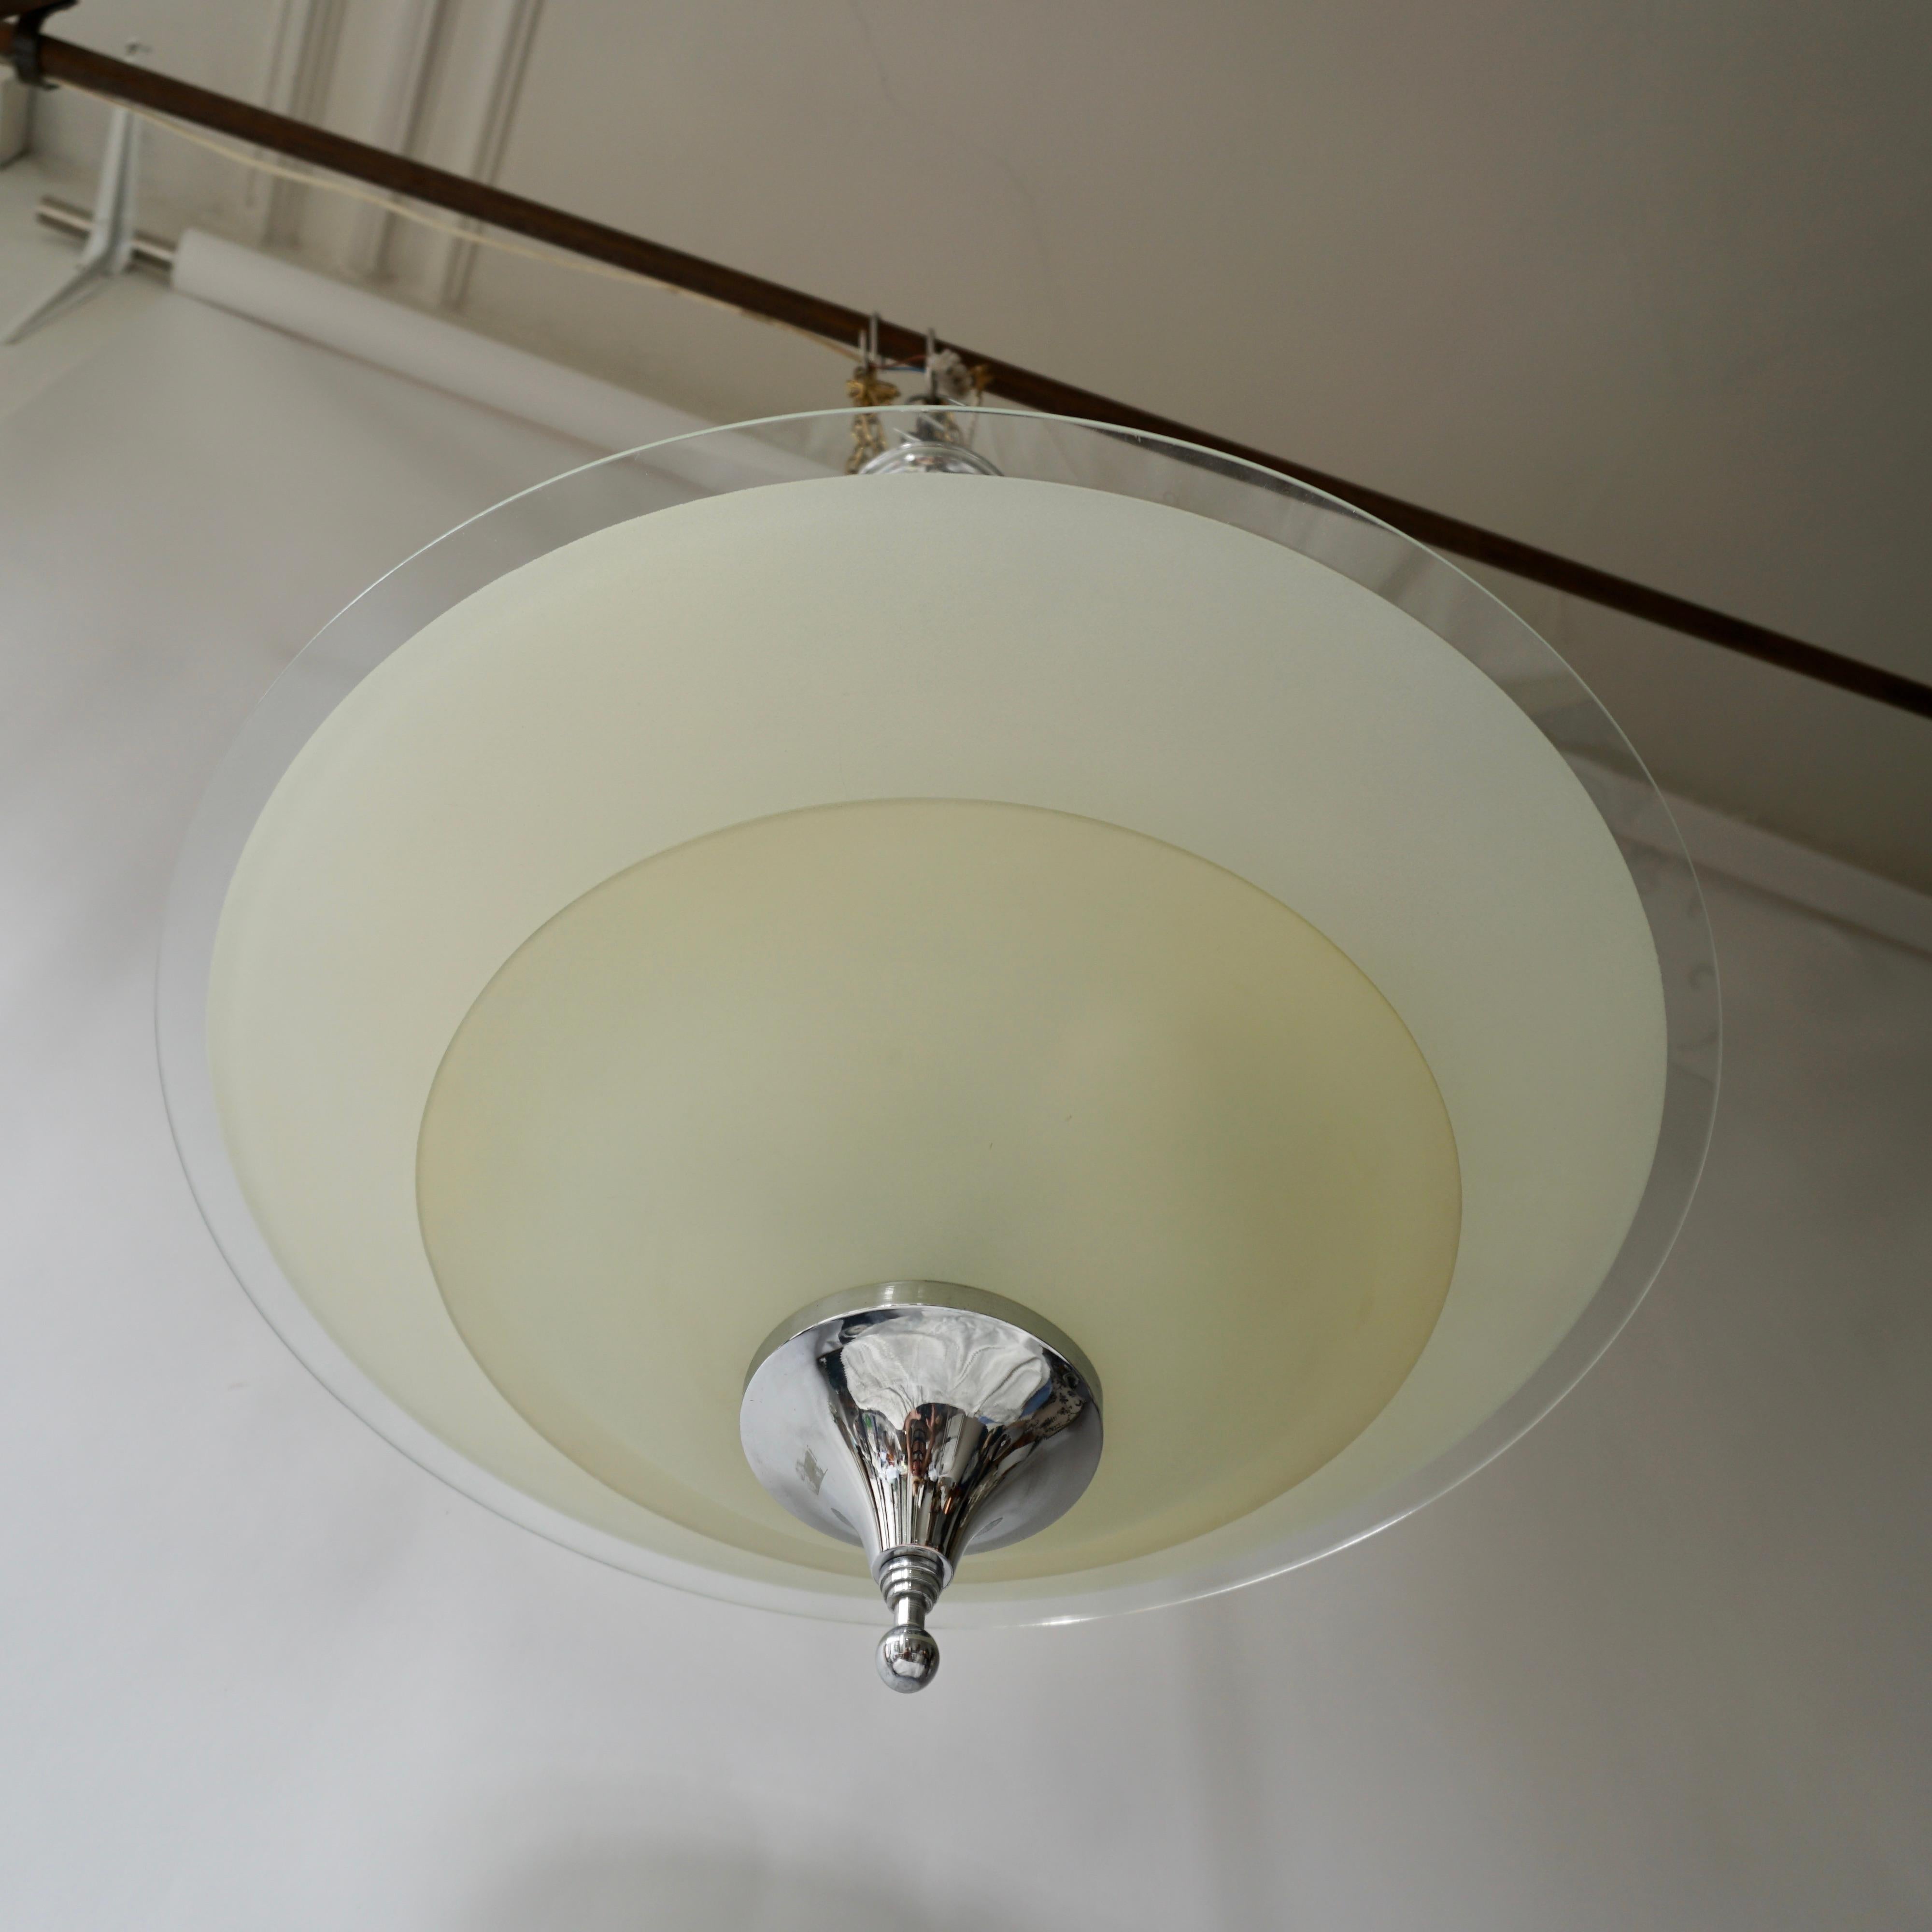 Frosted Art Deco Ceiling Light in Glass and Chrome, Belgium, 1930s For Sale